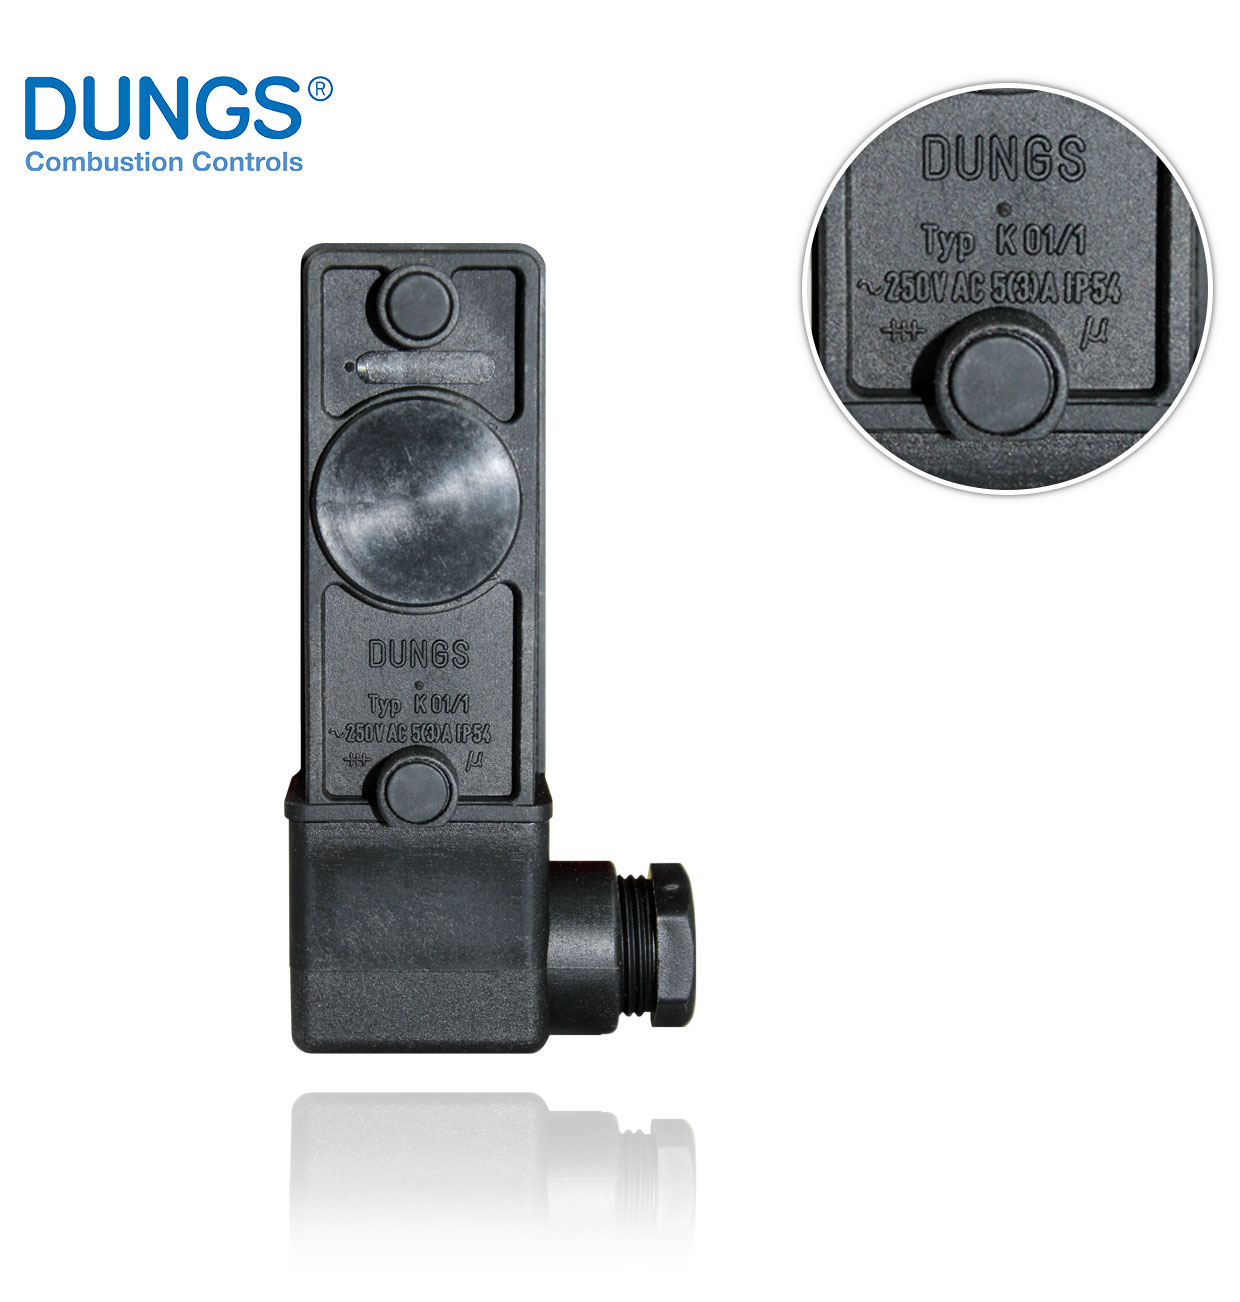 K-01/1 DUNGS LIMIT SWITCH FOR SOLENOID VALVE SERIES /5